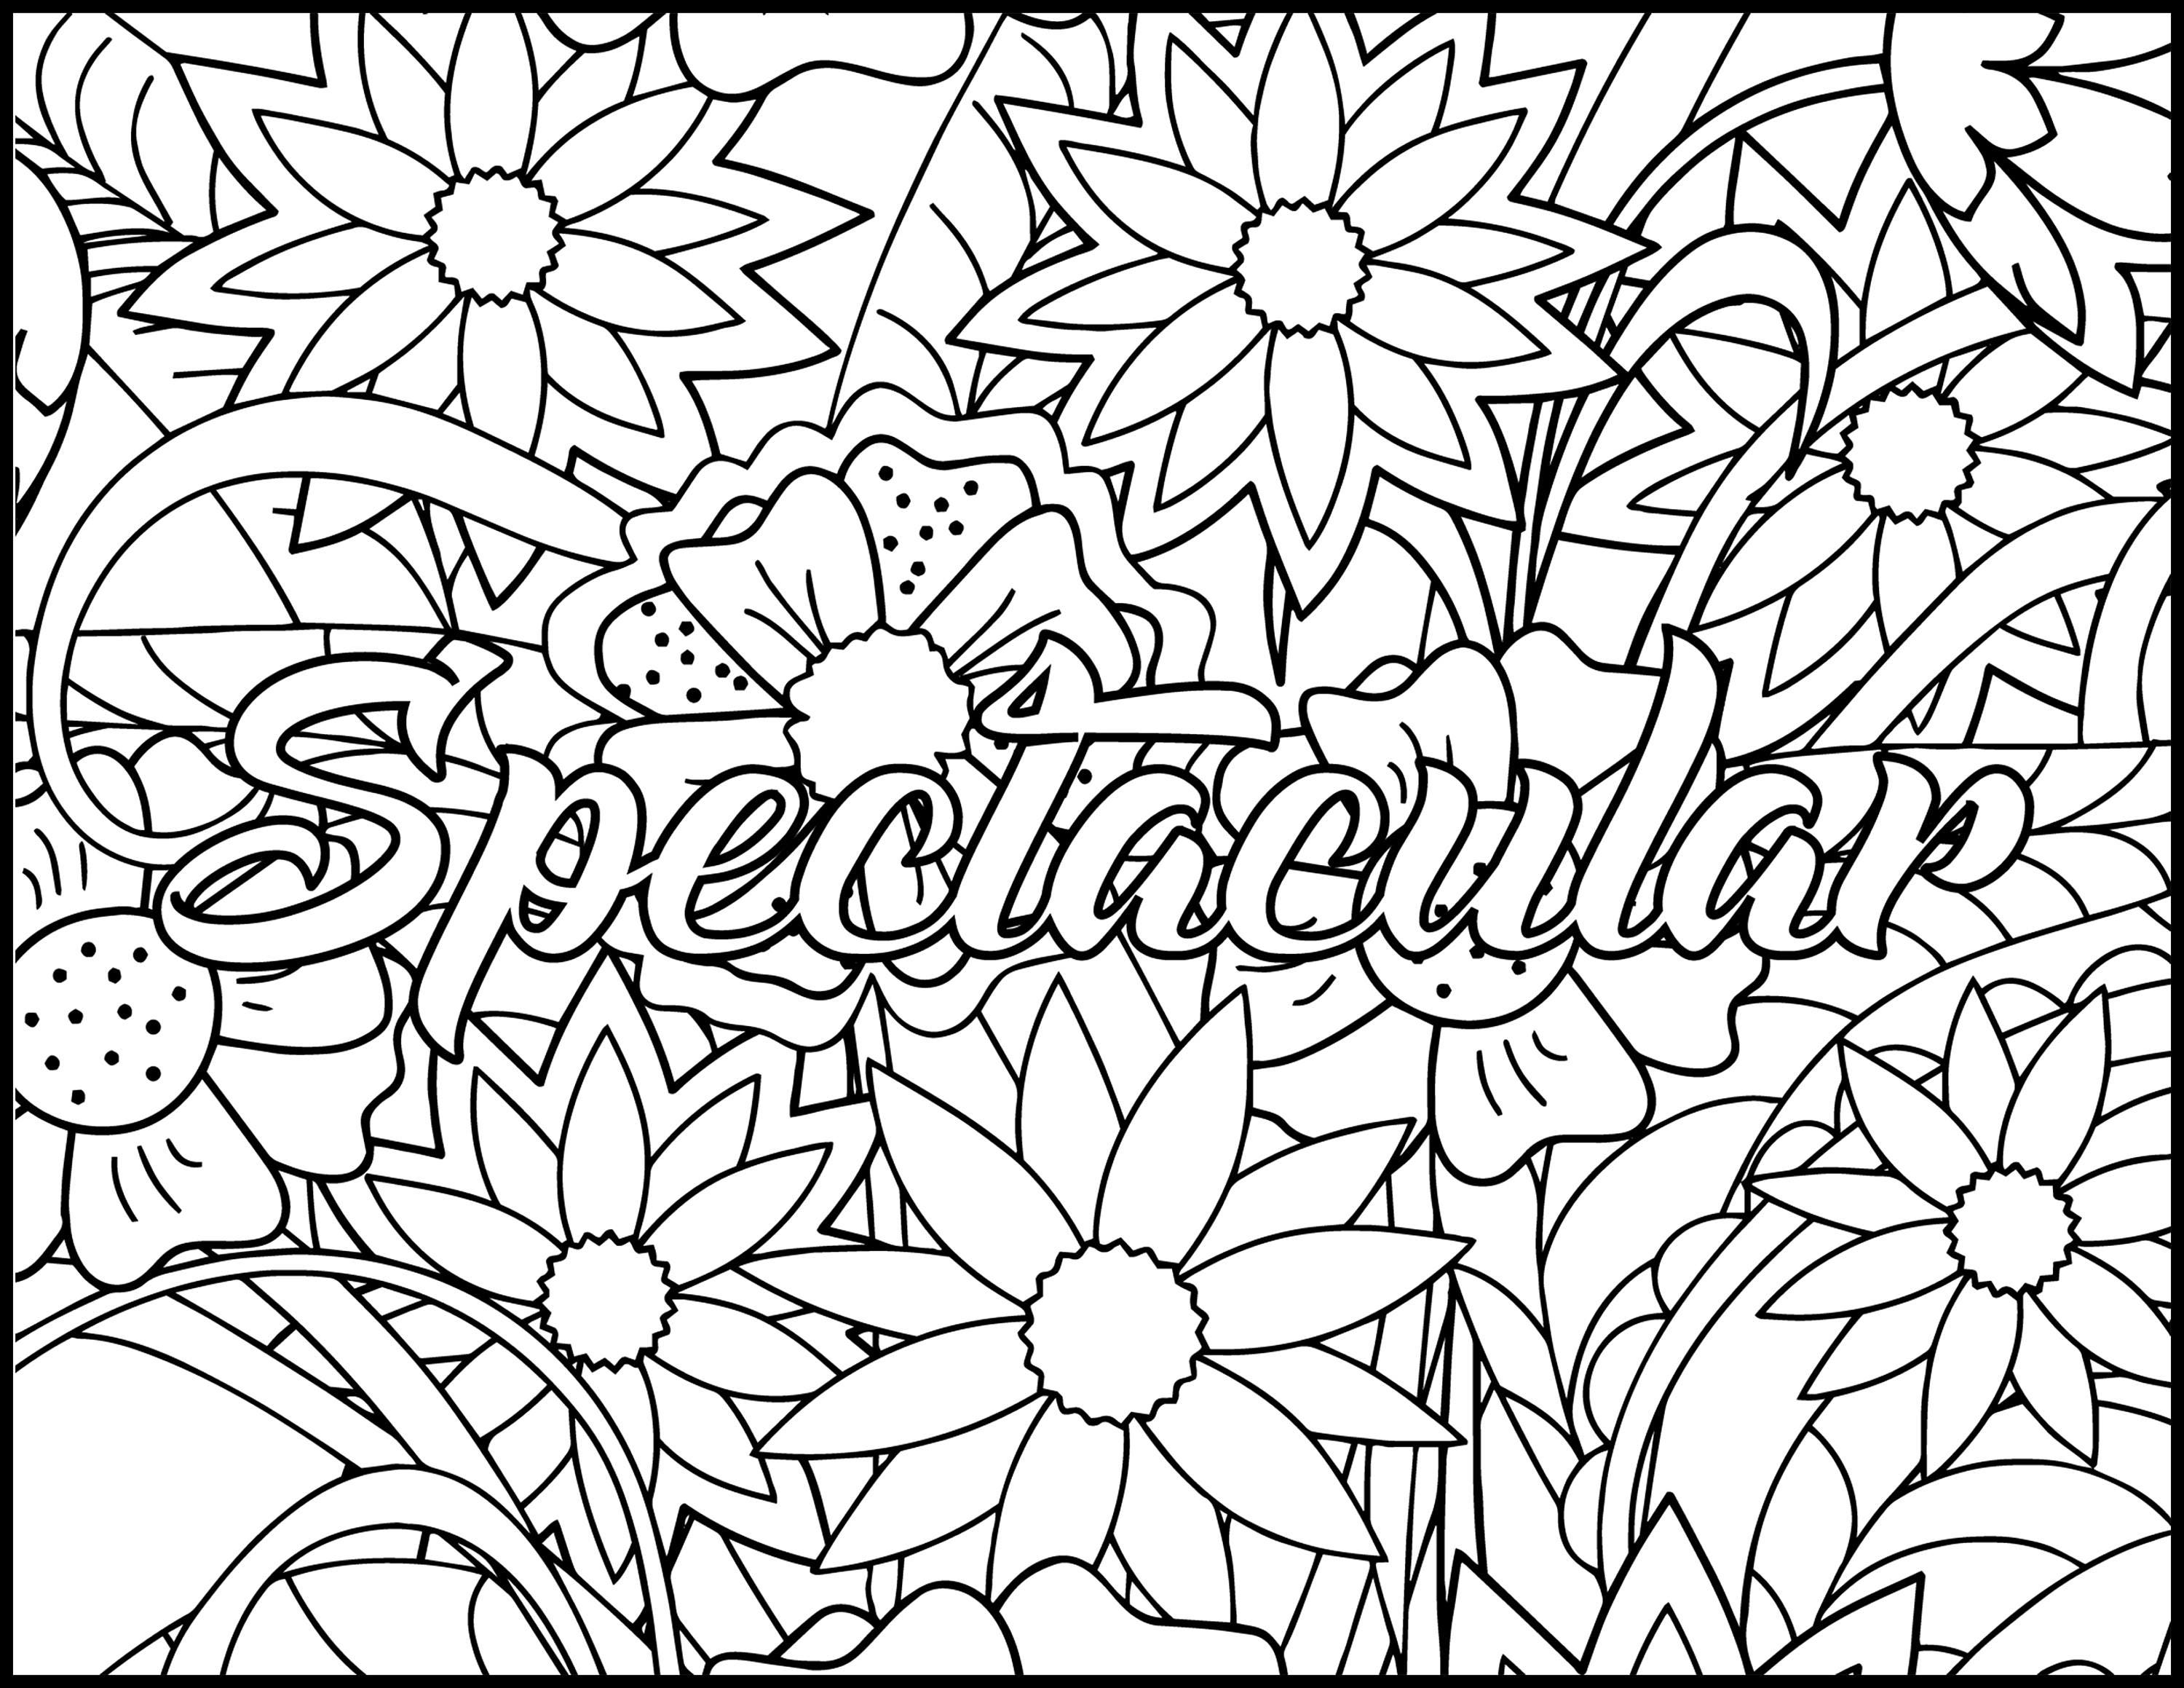 5 Printable Coloring Pages I AM Coloring Bundle Coloring